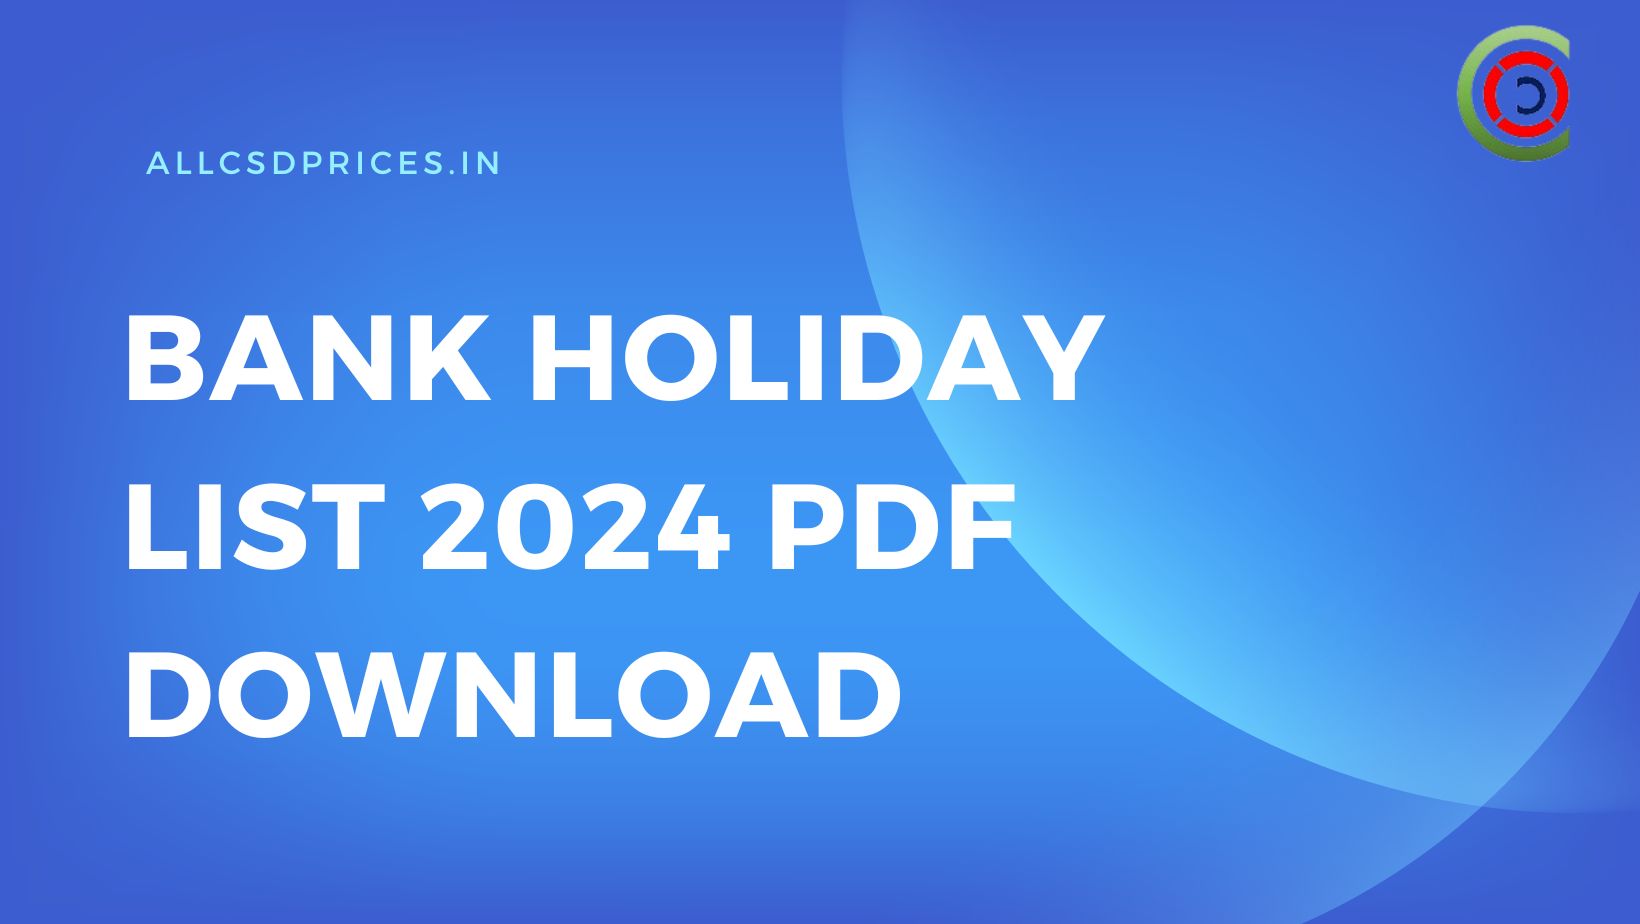 Bank Holiday List 2024 in India PDF Download